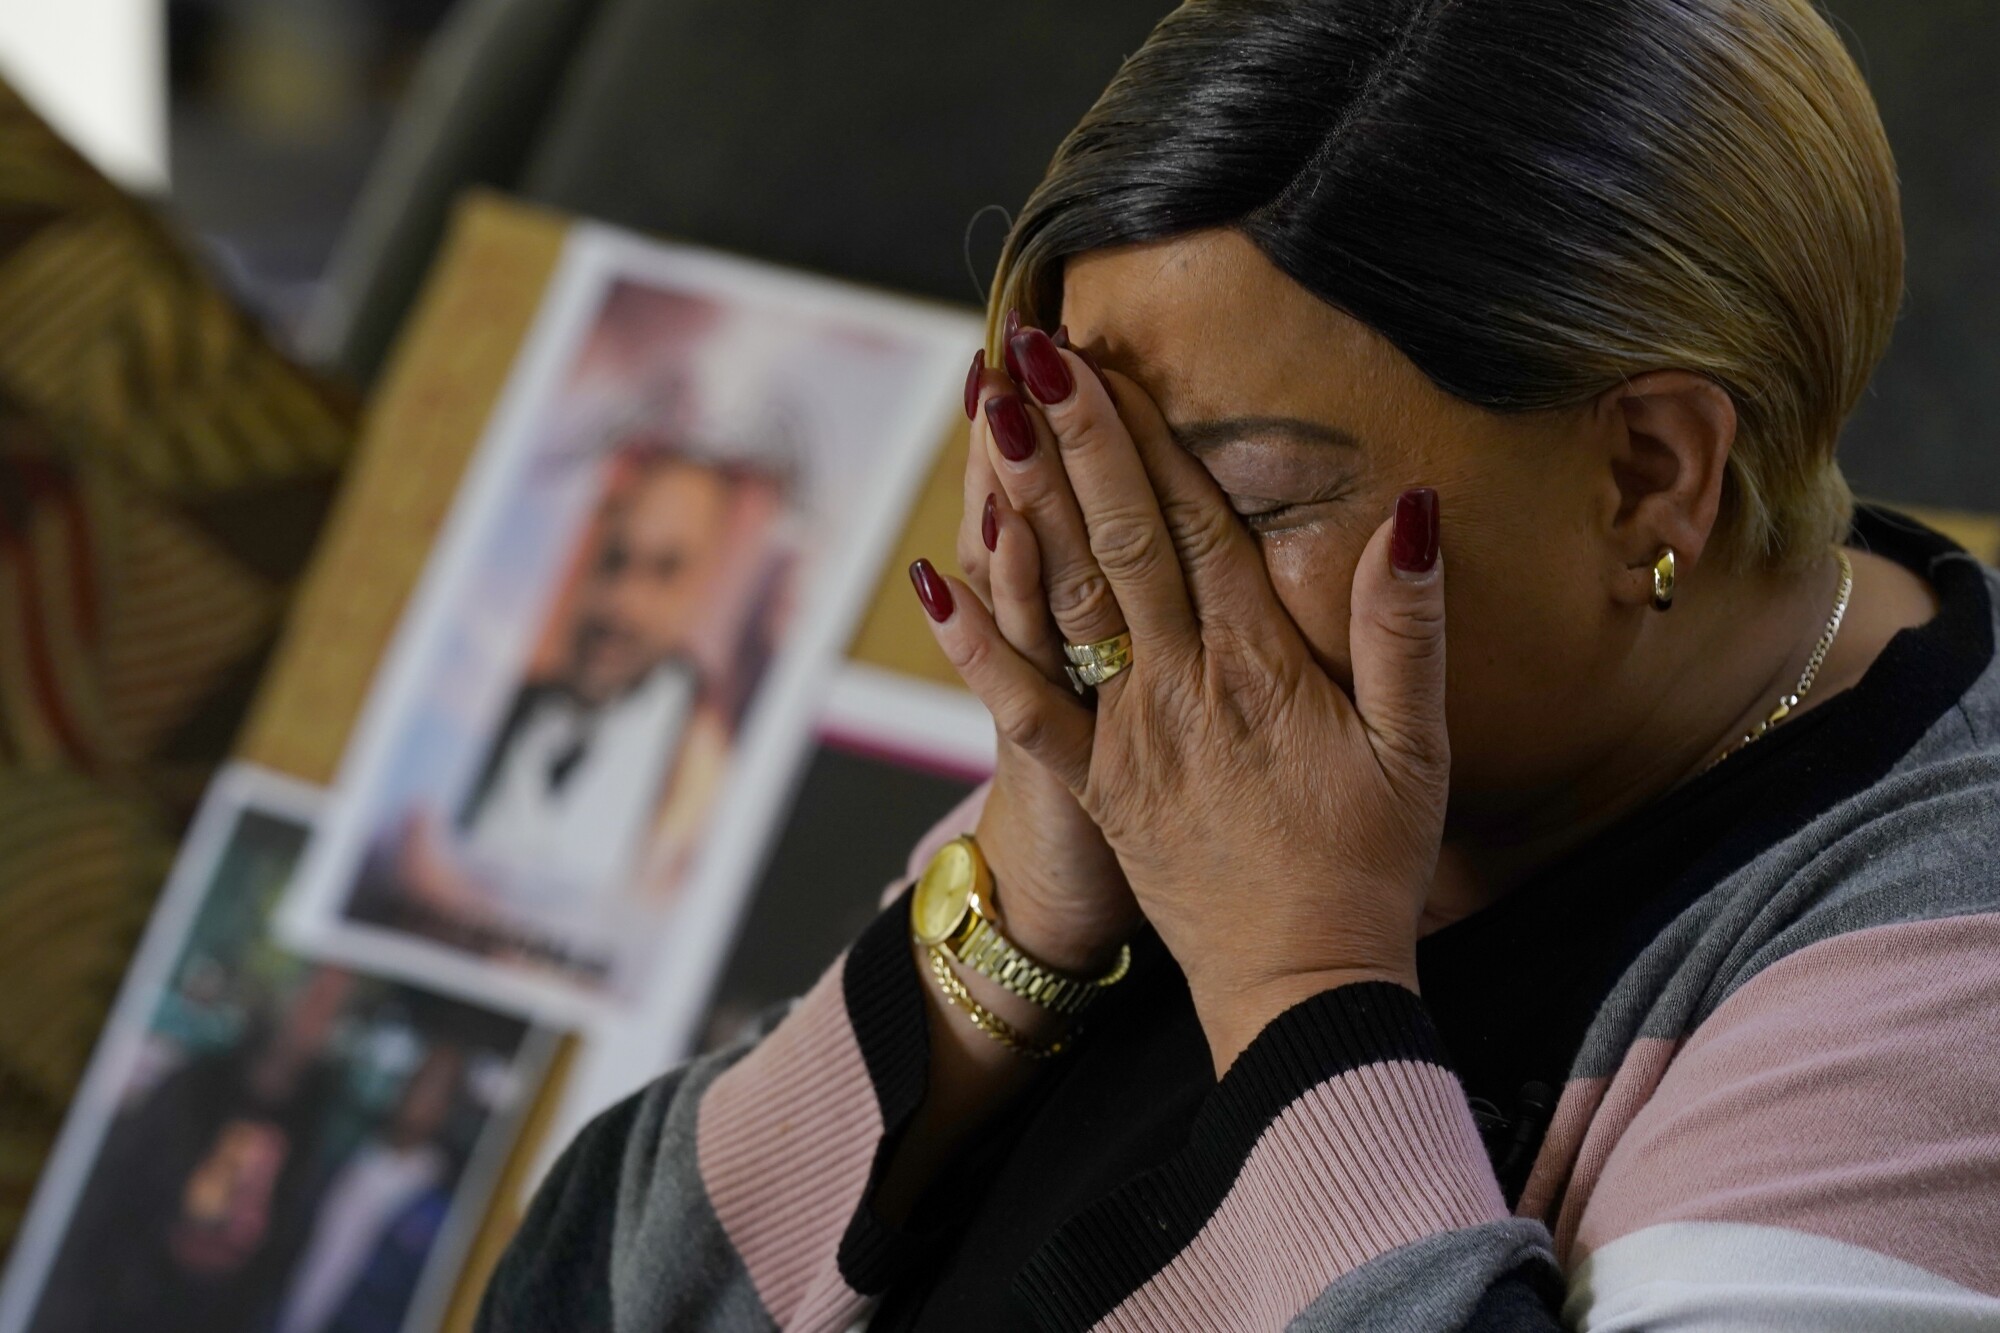 Penelope Scott holds her head in her hands while taking about her son, De'vazia Turner, a victim of Sunday's shooting.